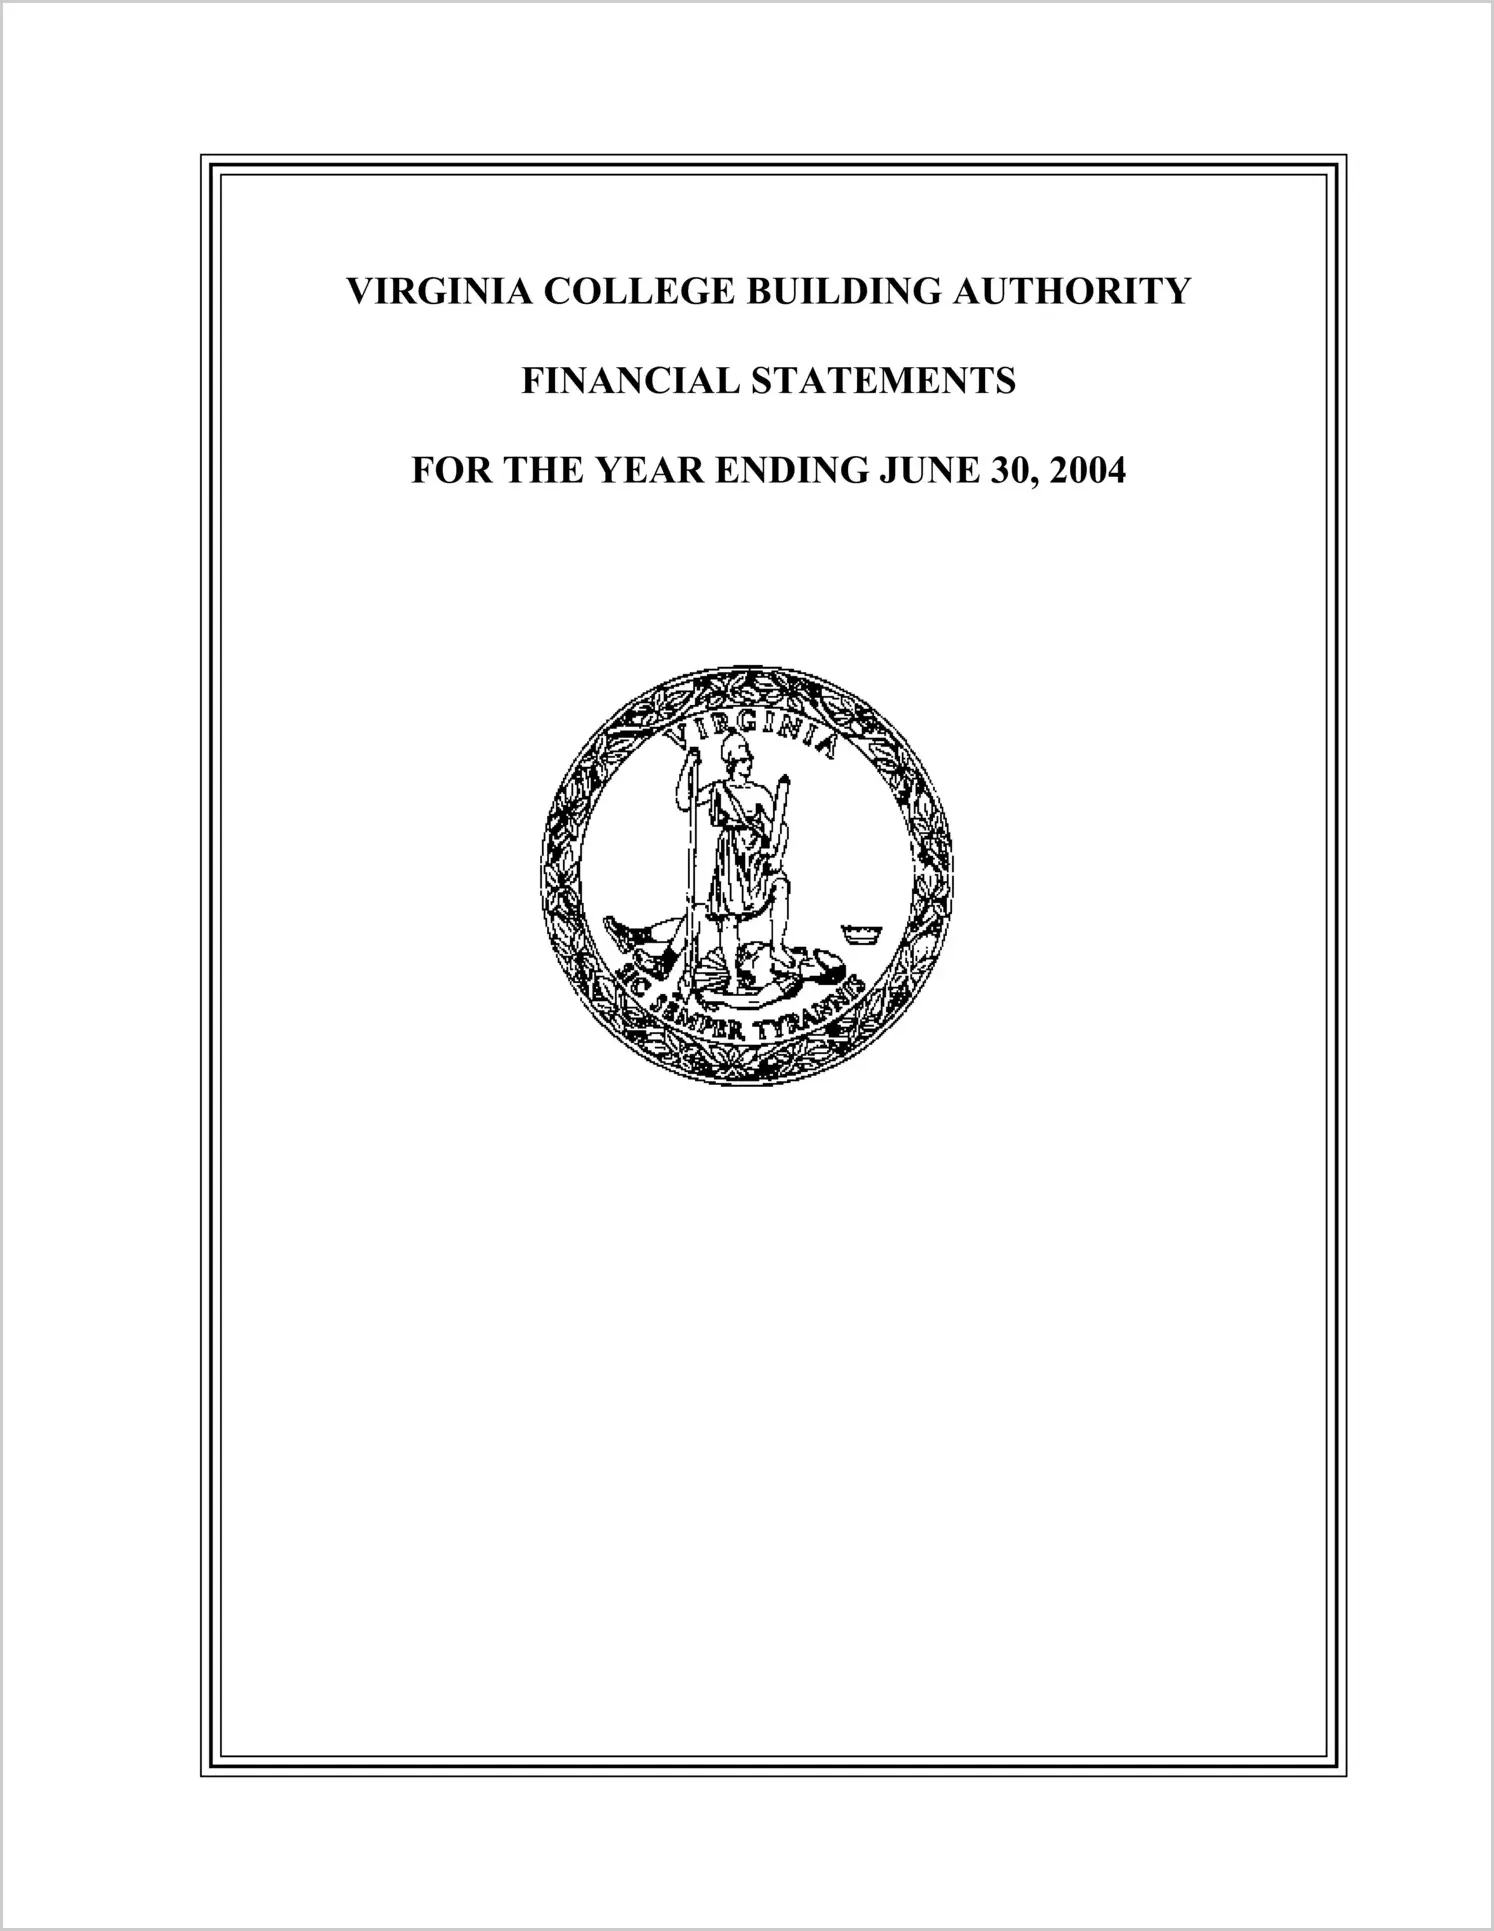 Virginia College Building Authority Financial Statements for the year ended June 30, 2004